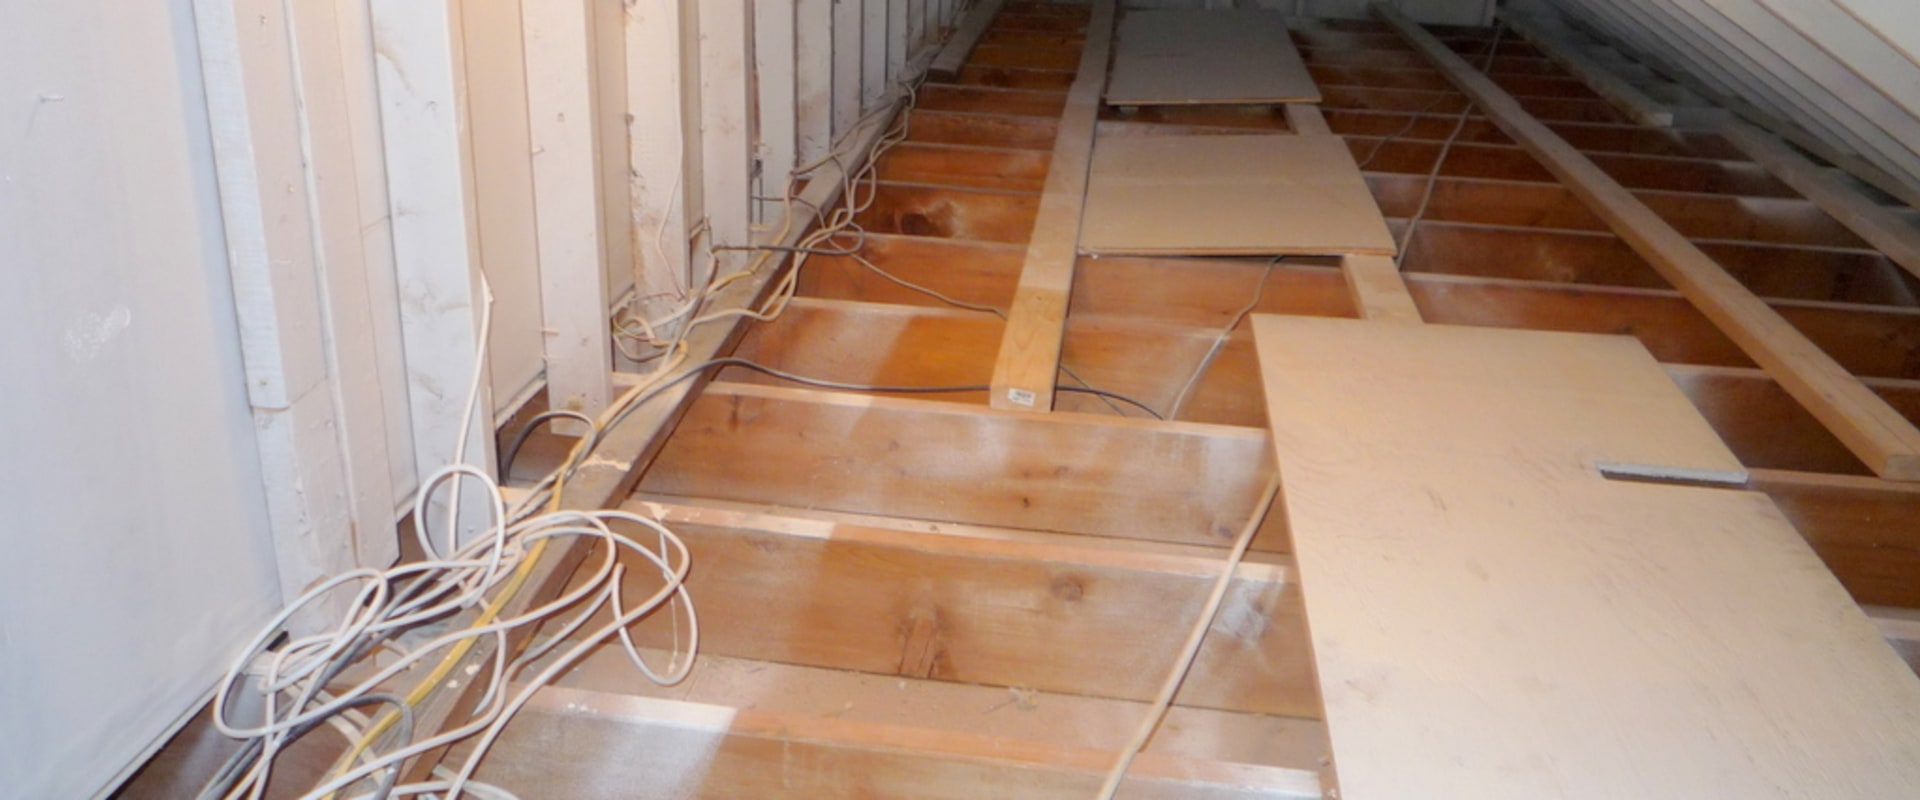 Should You Remove Attic Floor Insulation Before Doing Spray Foam Insulation?